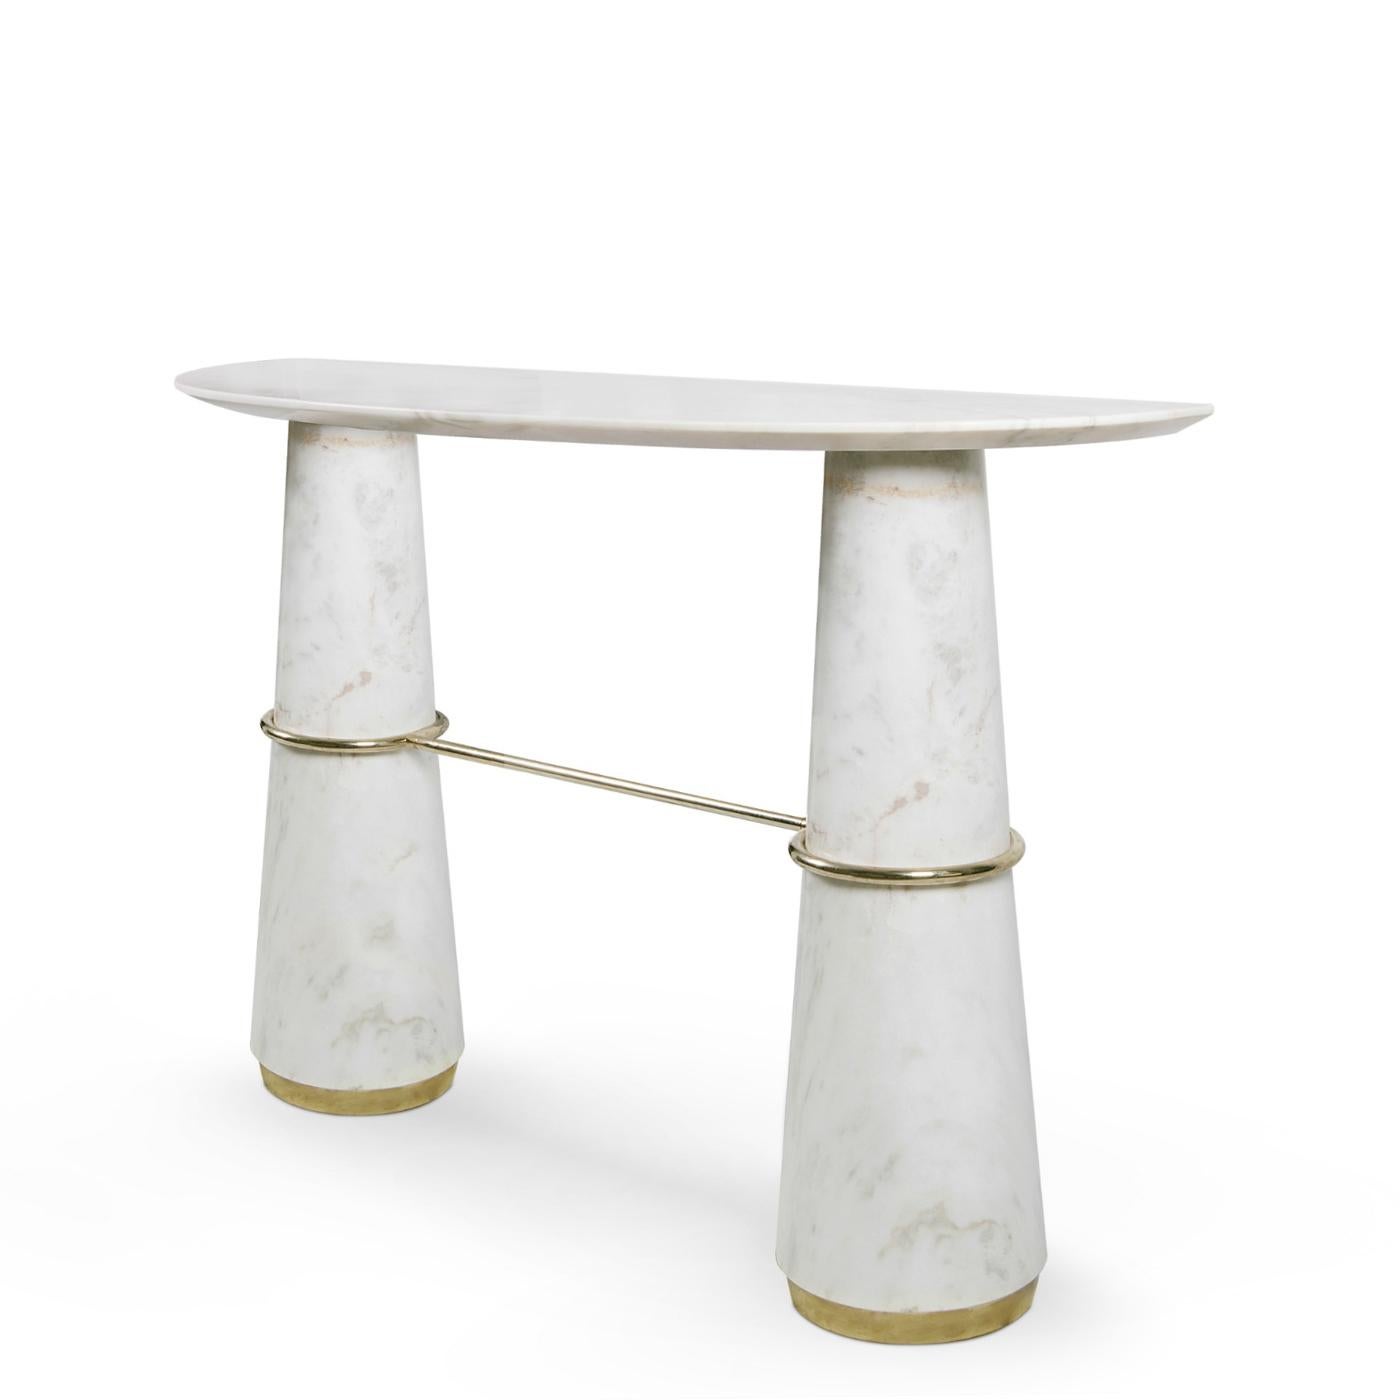 Console table Tama all in solid white marble,
with polished brass finishes.